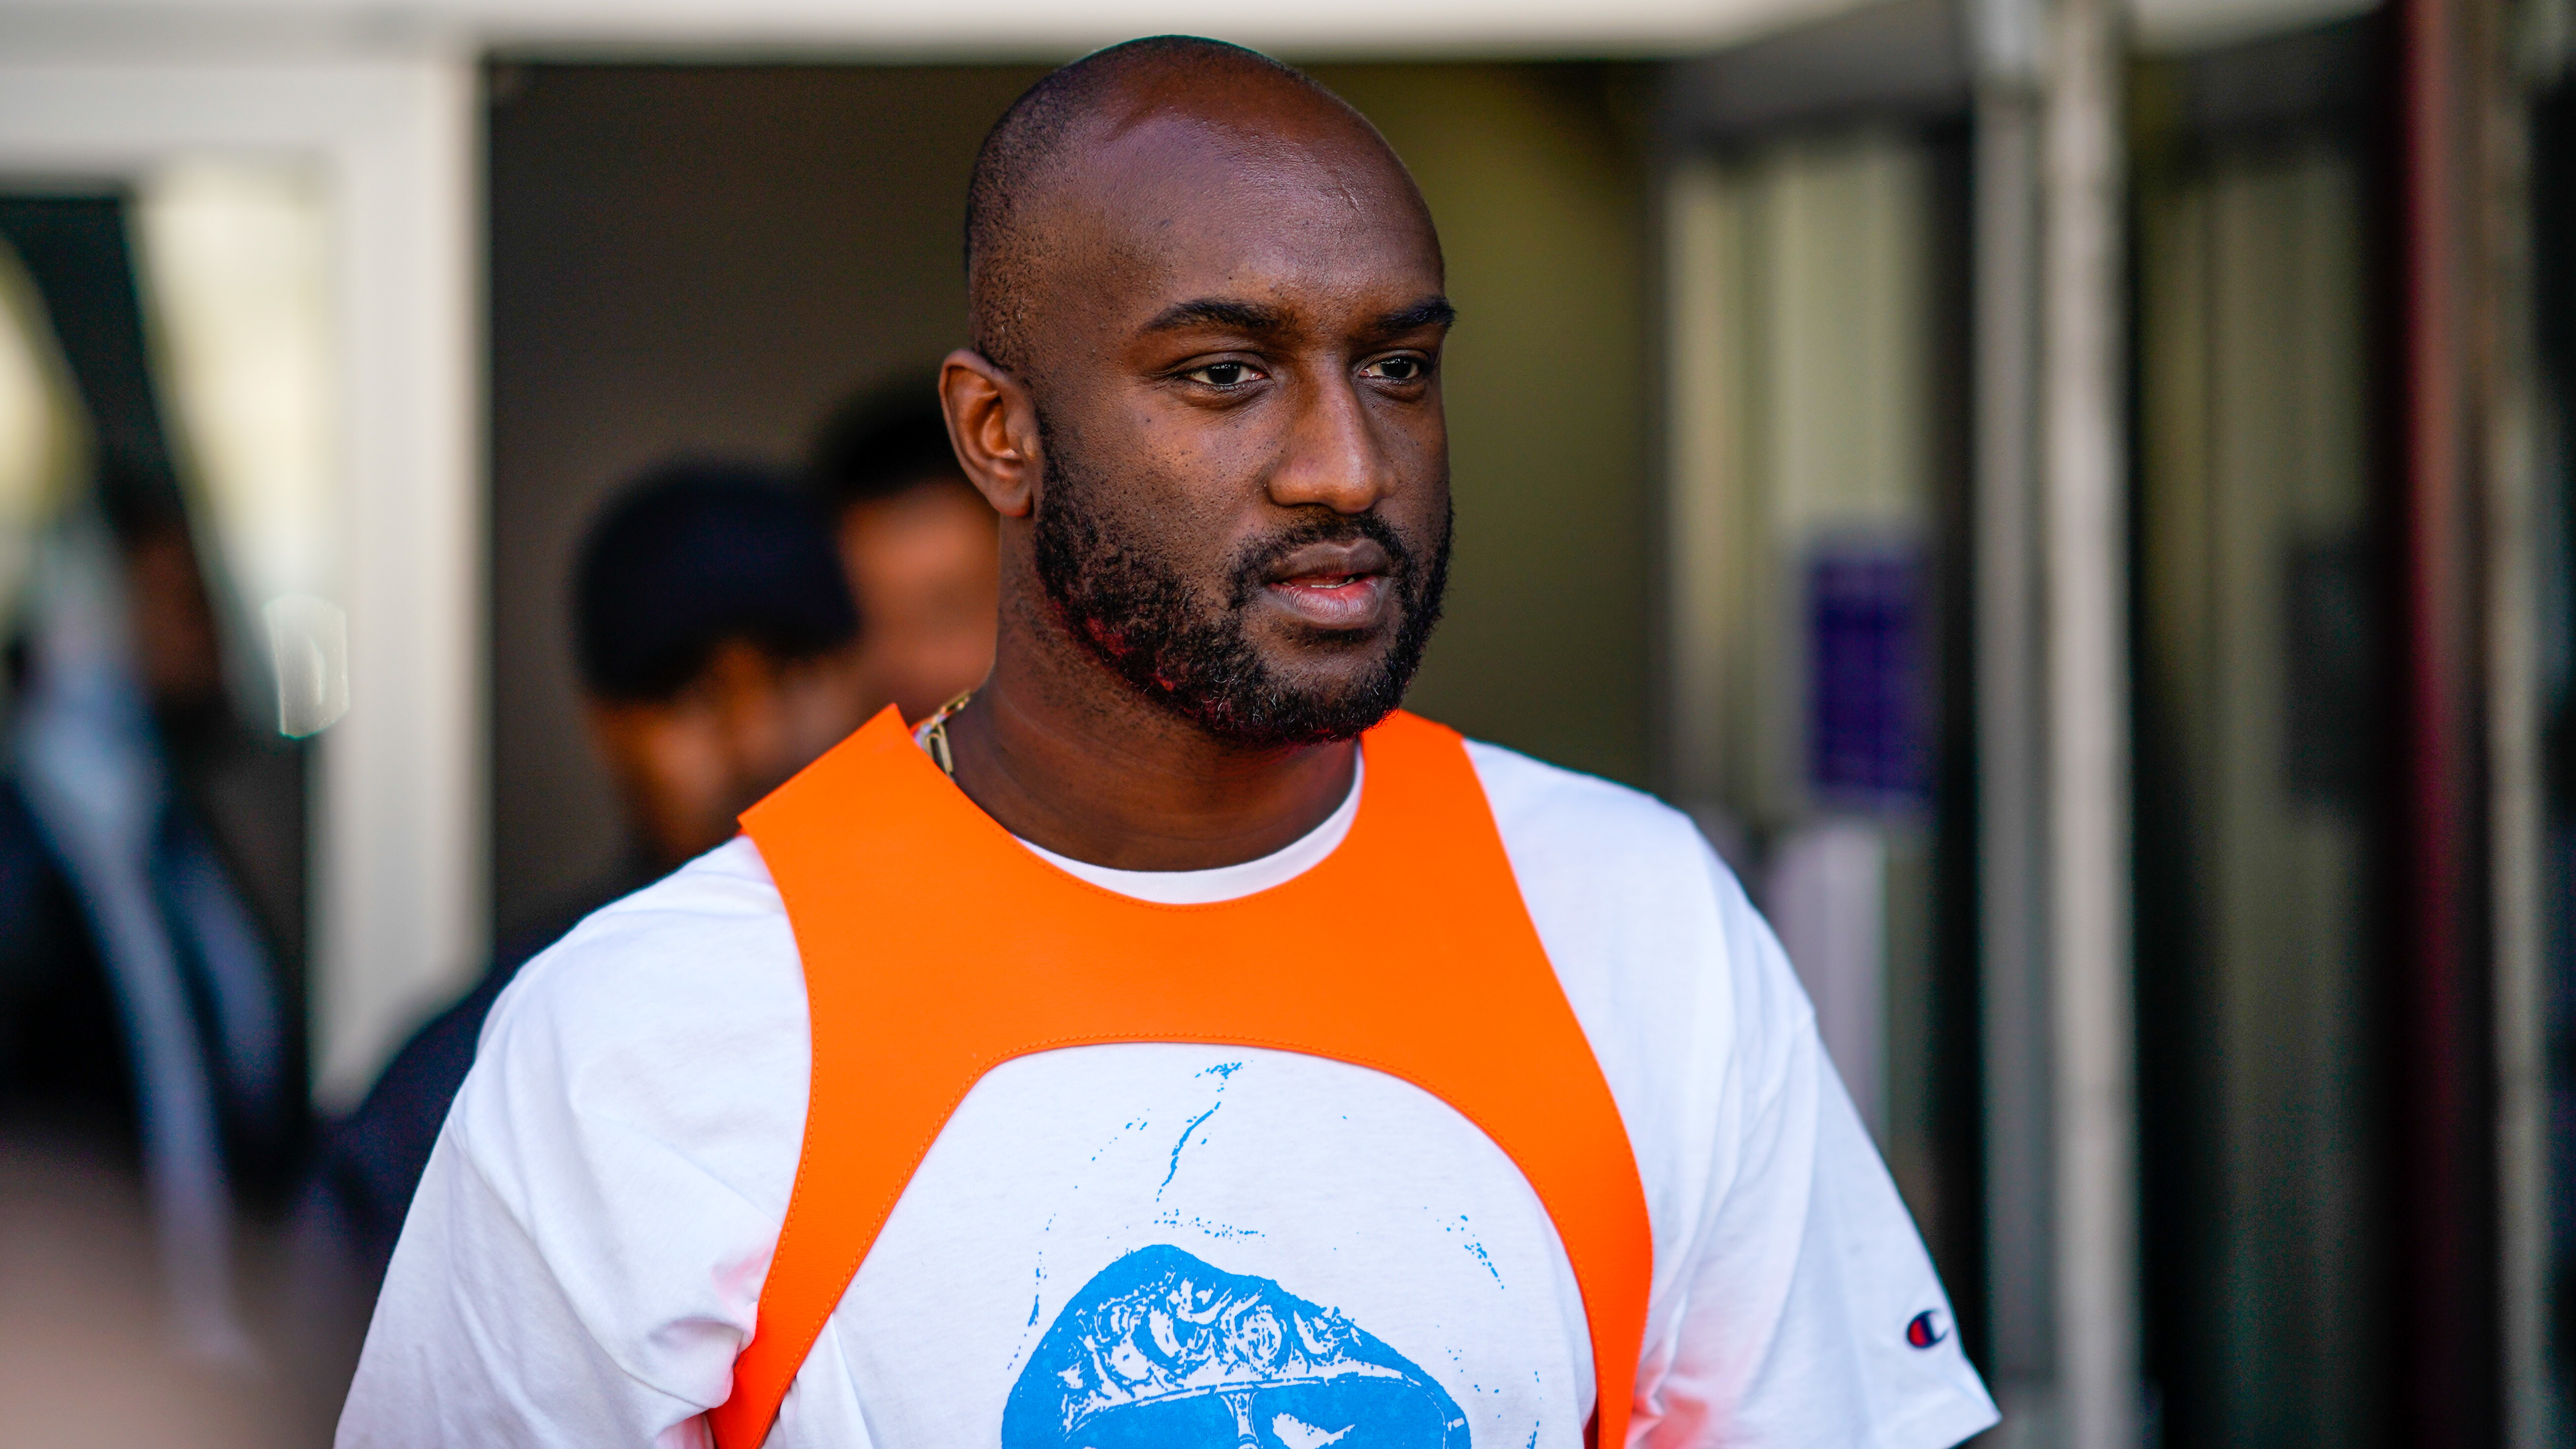 Virgil Abloh on the Birth of His 'The Ten' Collection With Nike